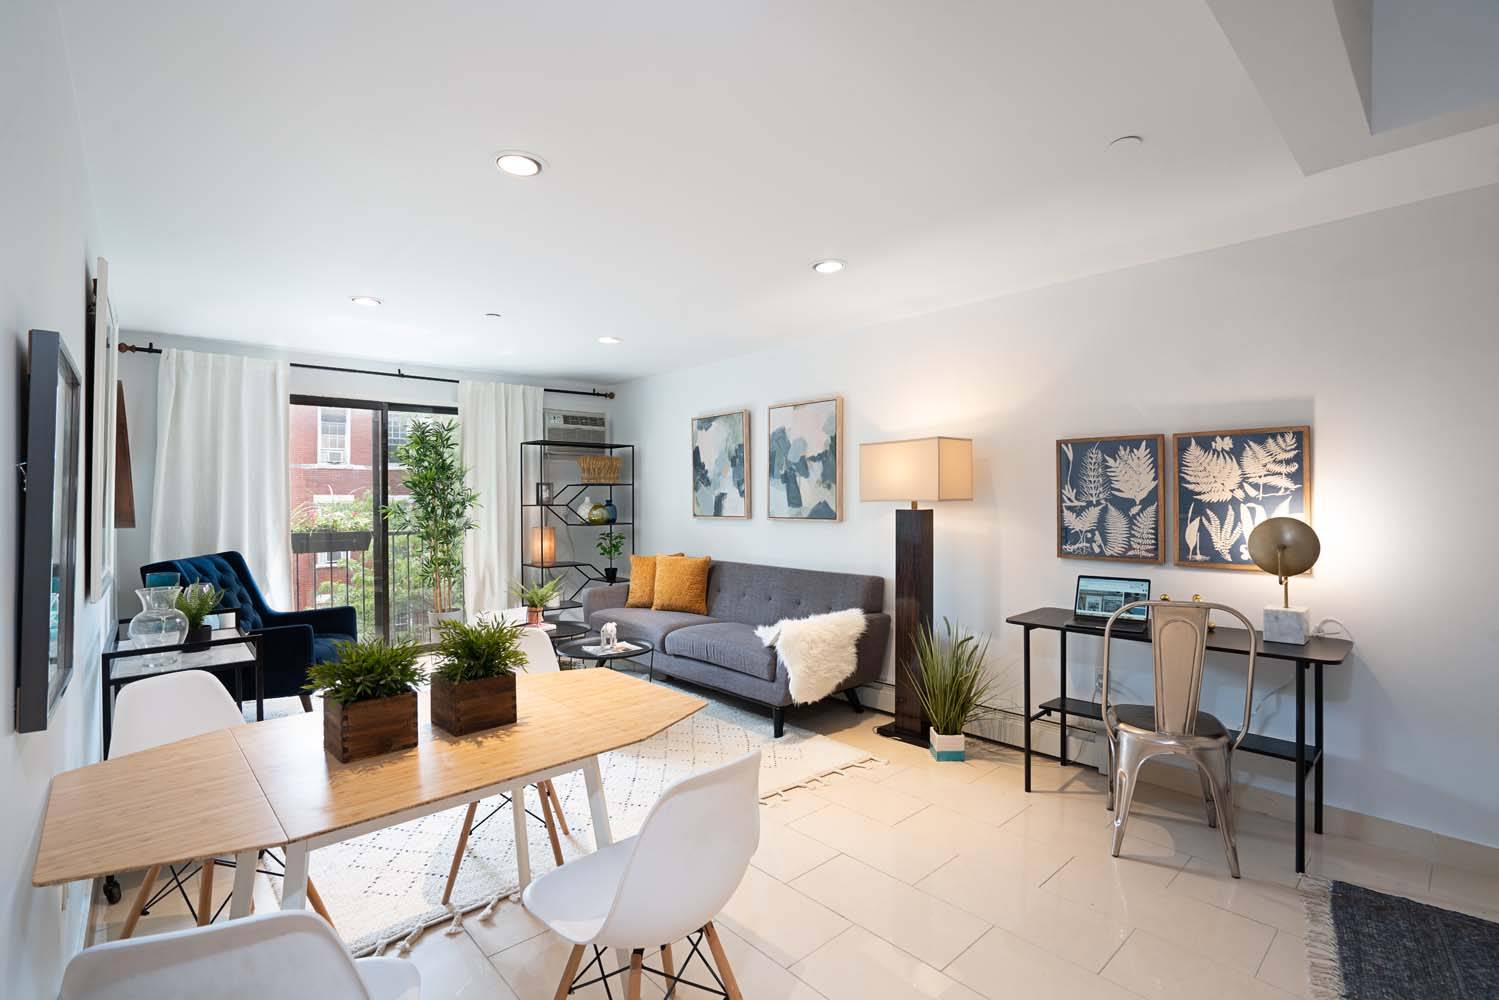 SPACIOUS ONE BEDROOM layout in cool GREENPOINT, BROOKLYN Upon entering this airy apartment you will notice the generous and thoughtful layout.